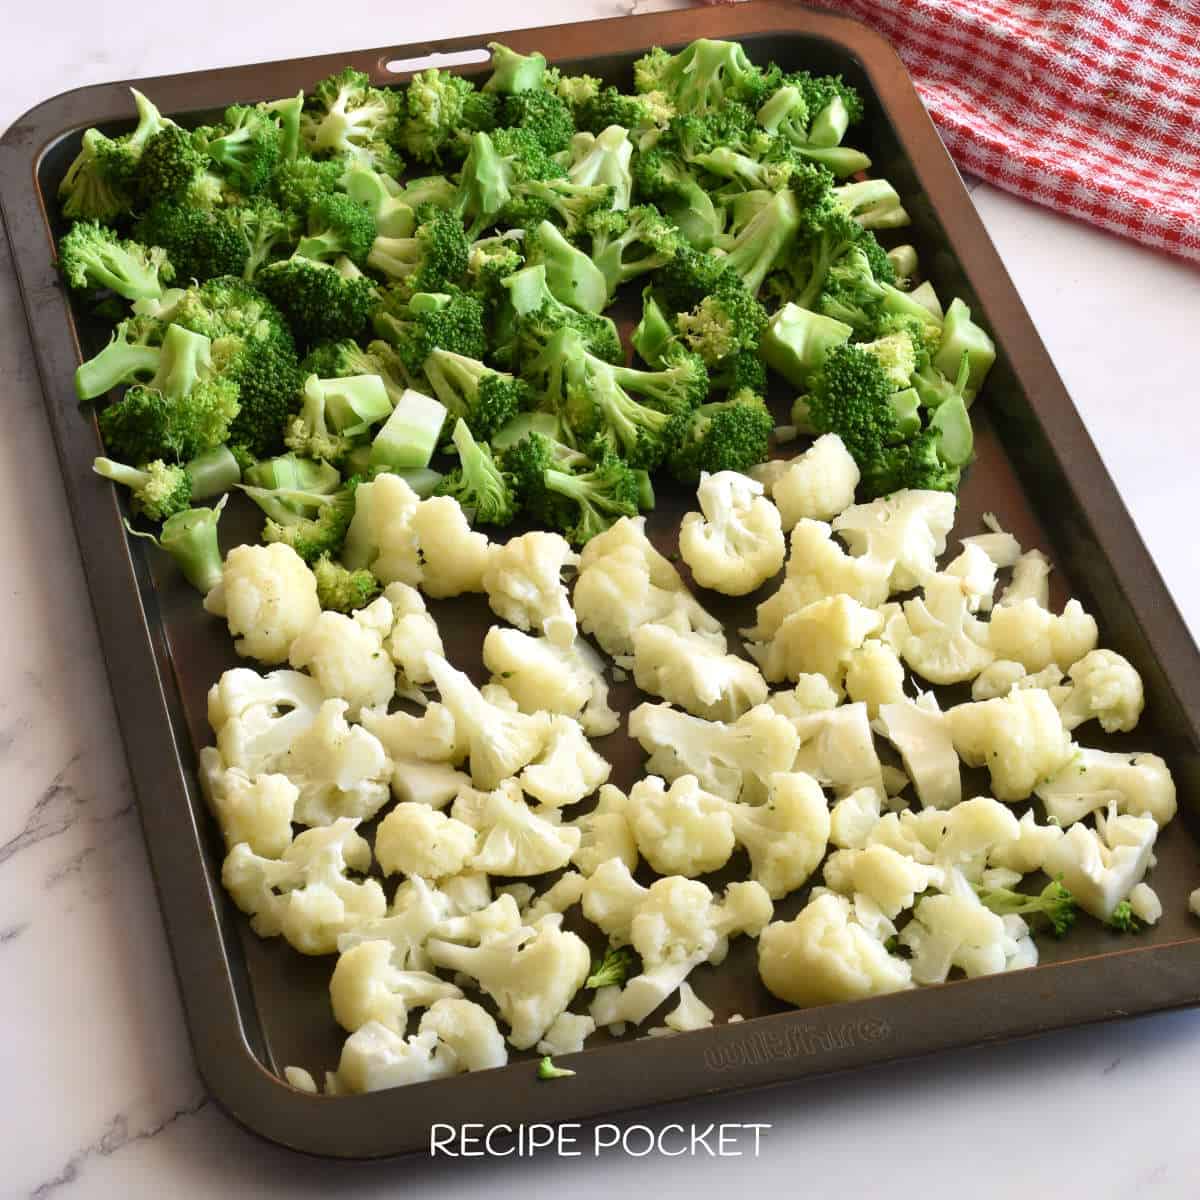 Broccoli and cauilflower pieces on a tray.